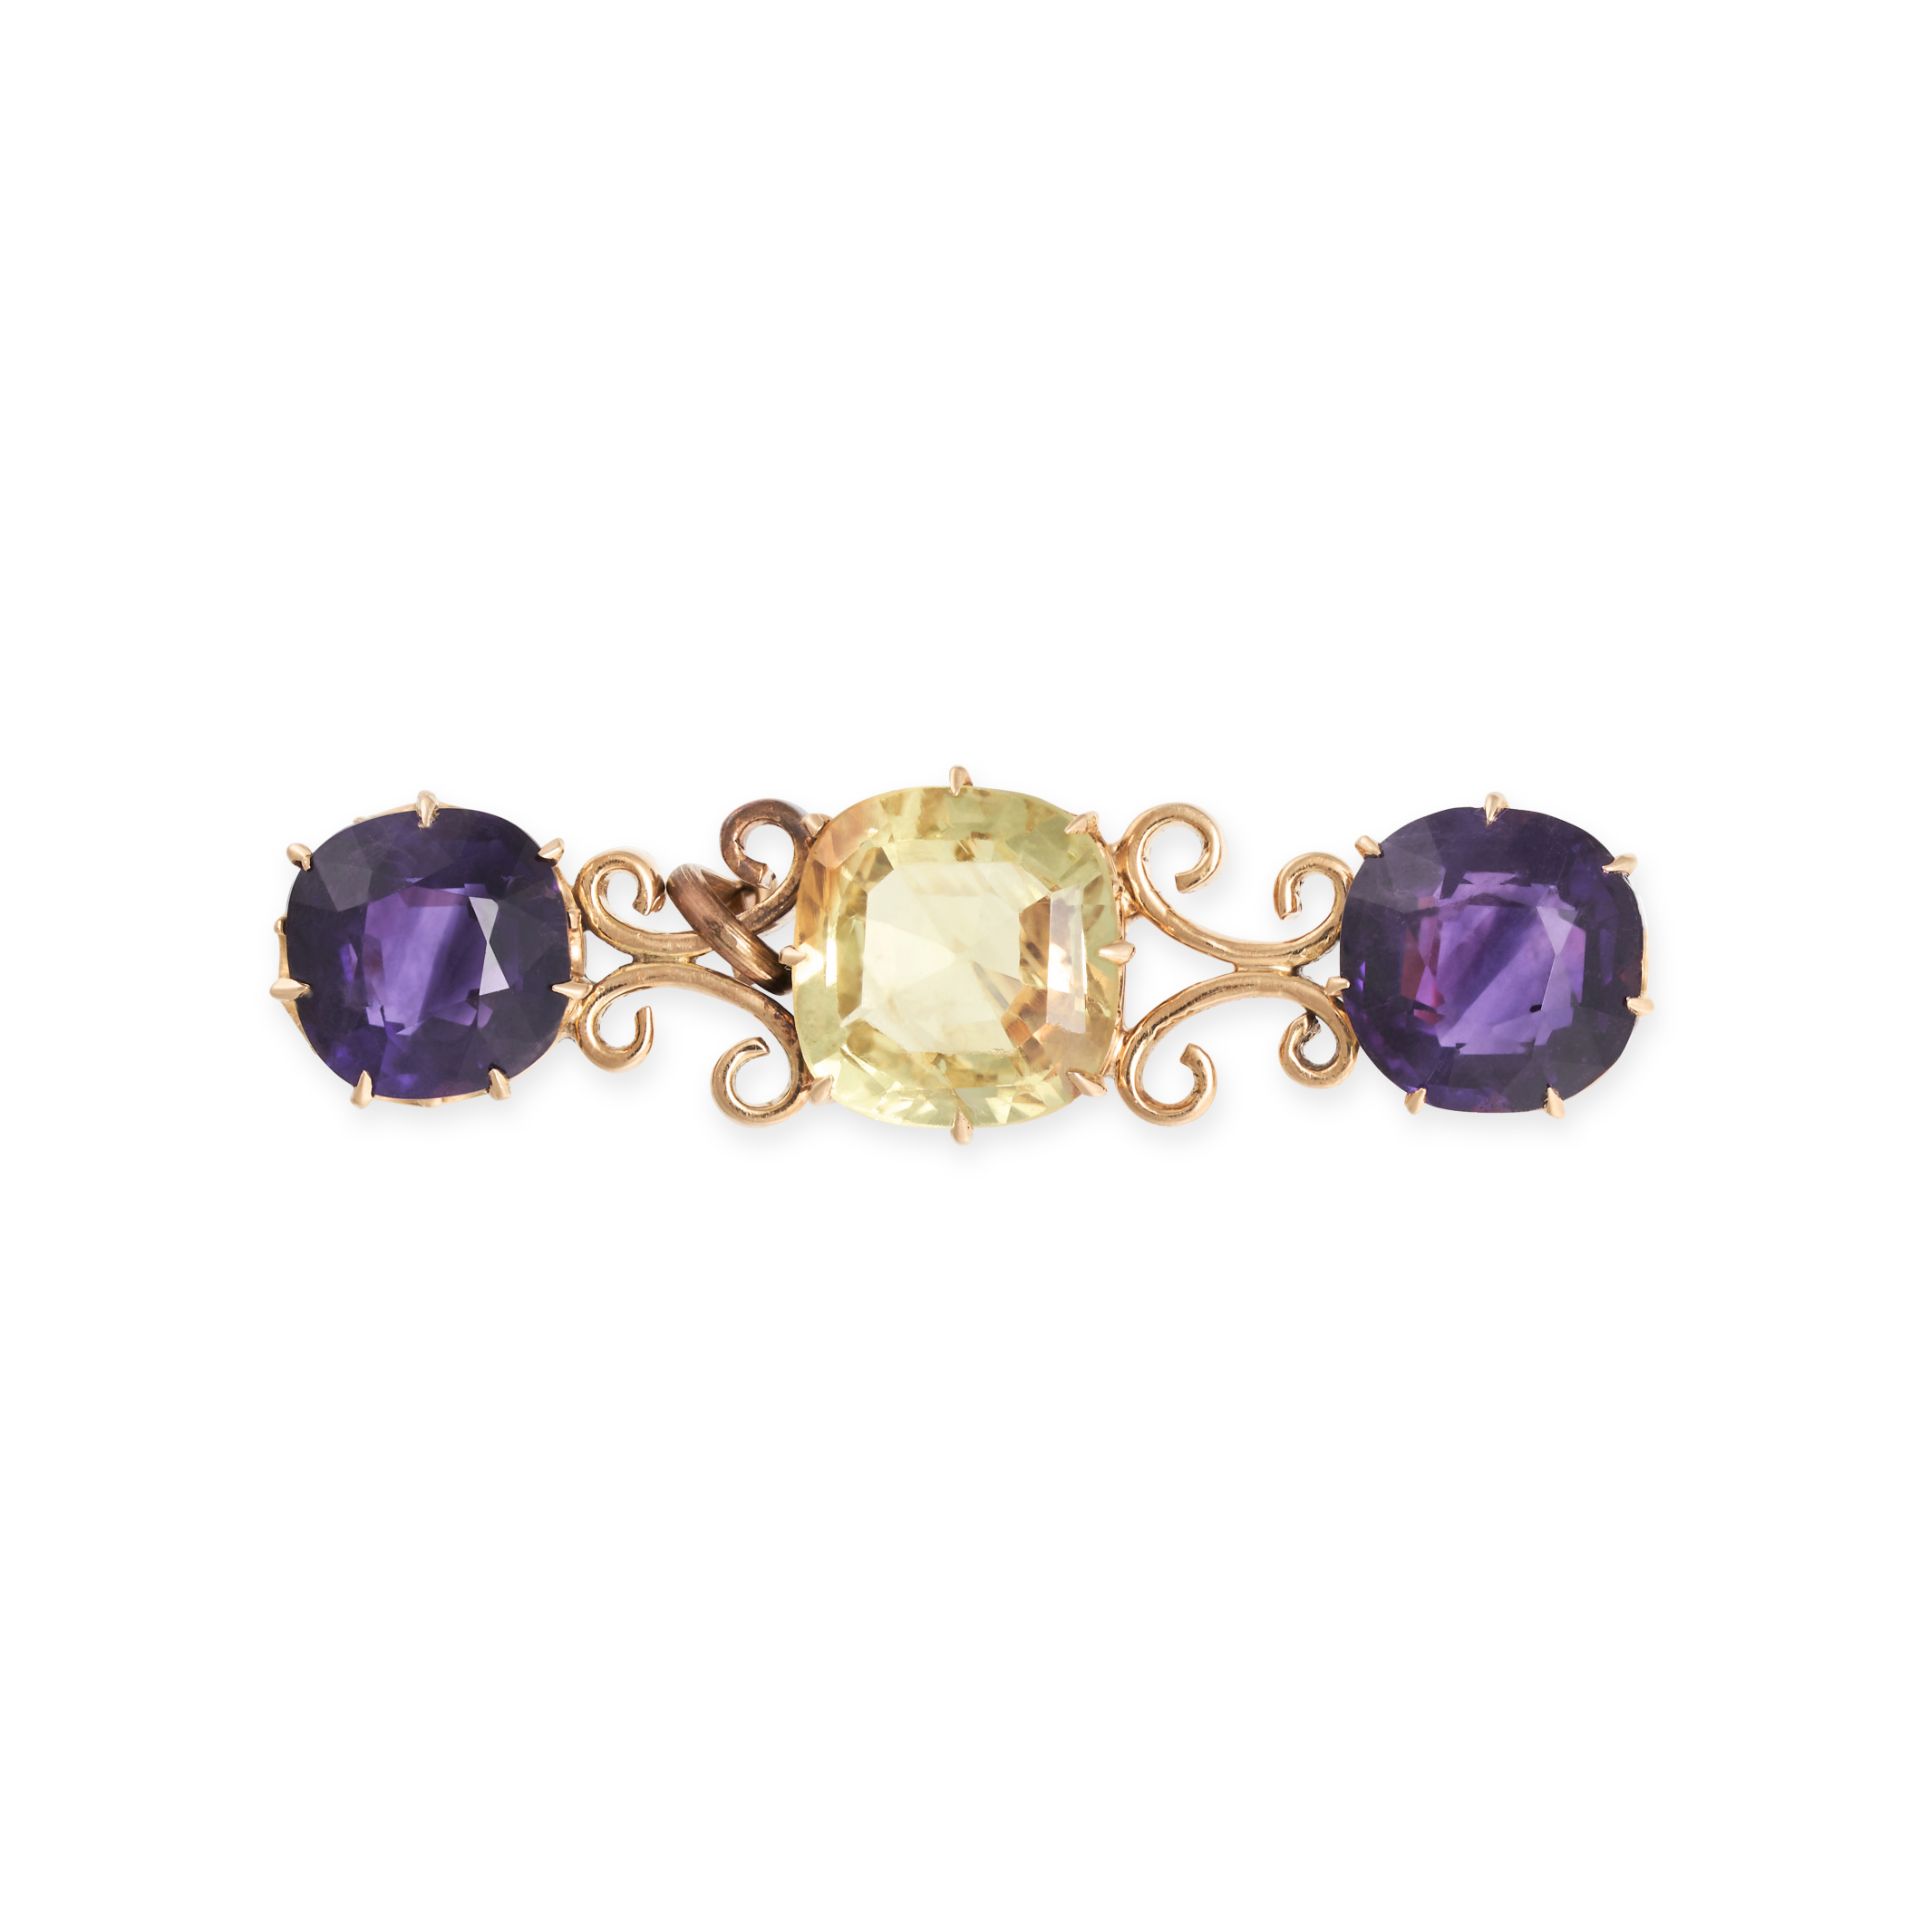 NO RESERVE - AN ANTIQUE AMETHYST AND CITRINE BAR BROOCH in yellow gold, set with a cushion cut ci...